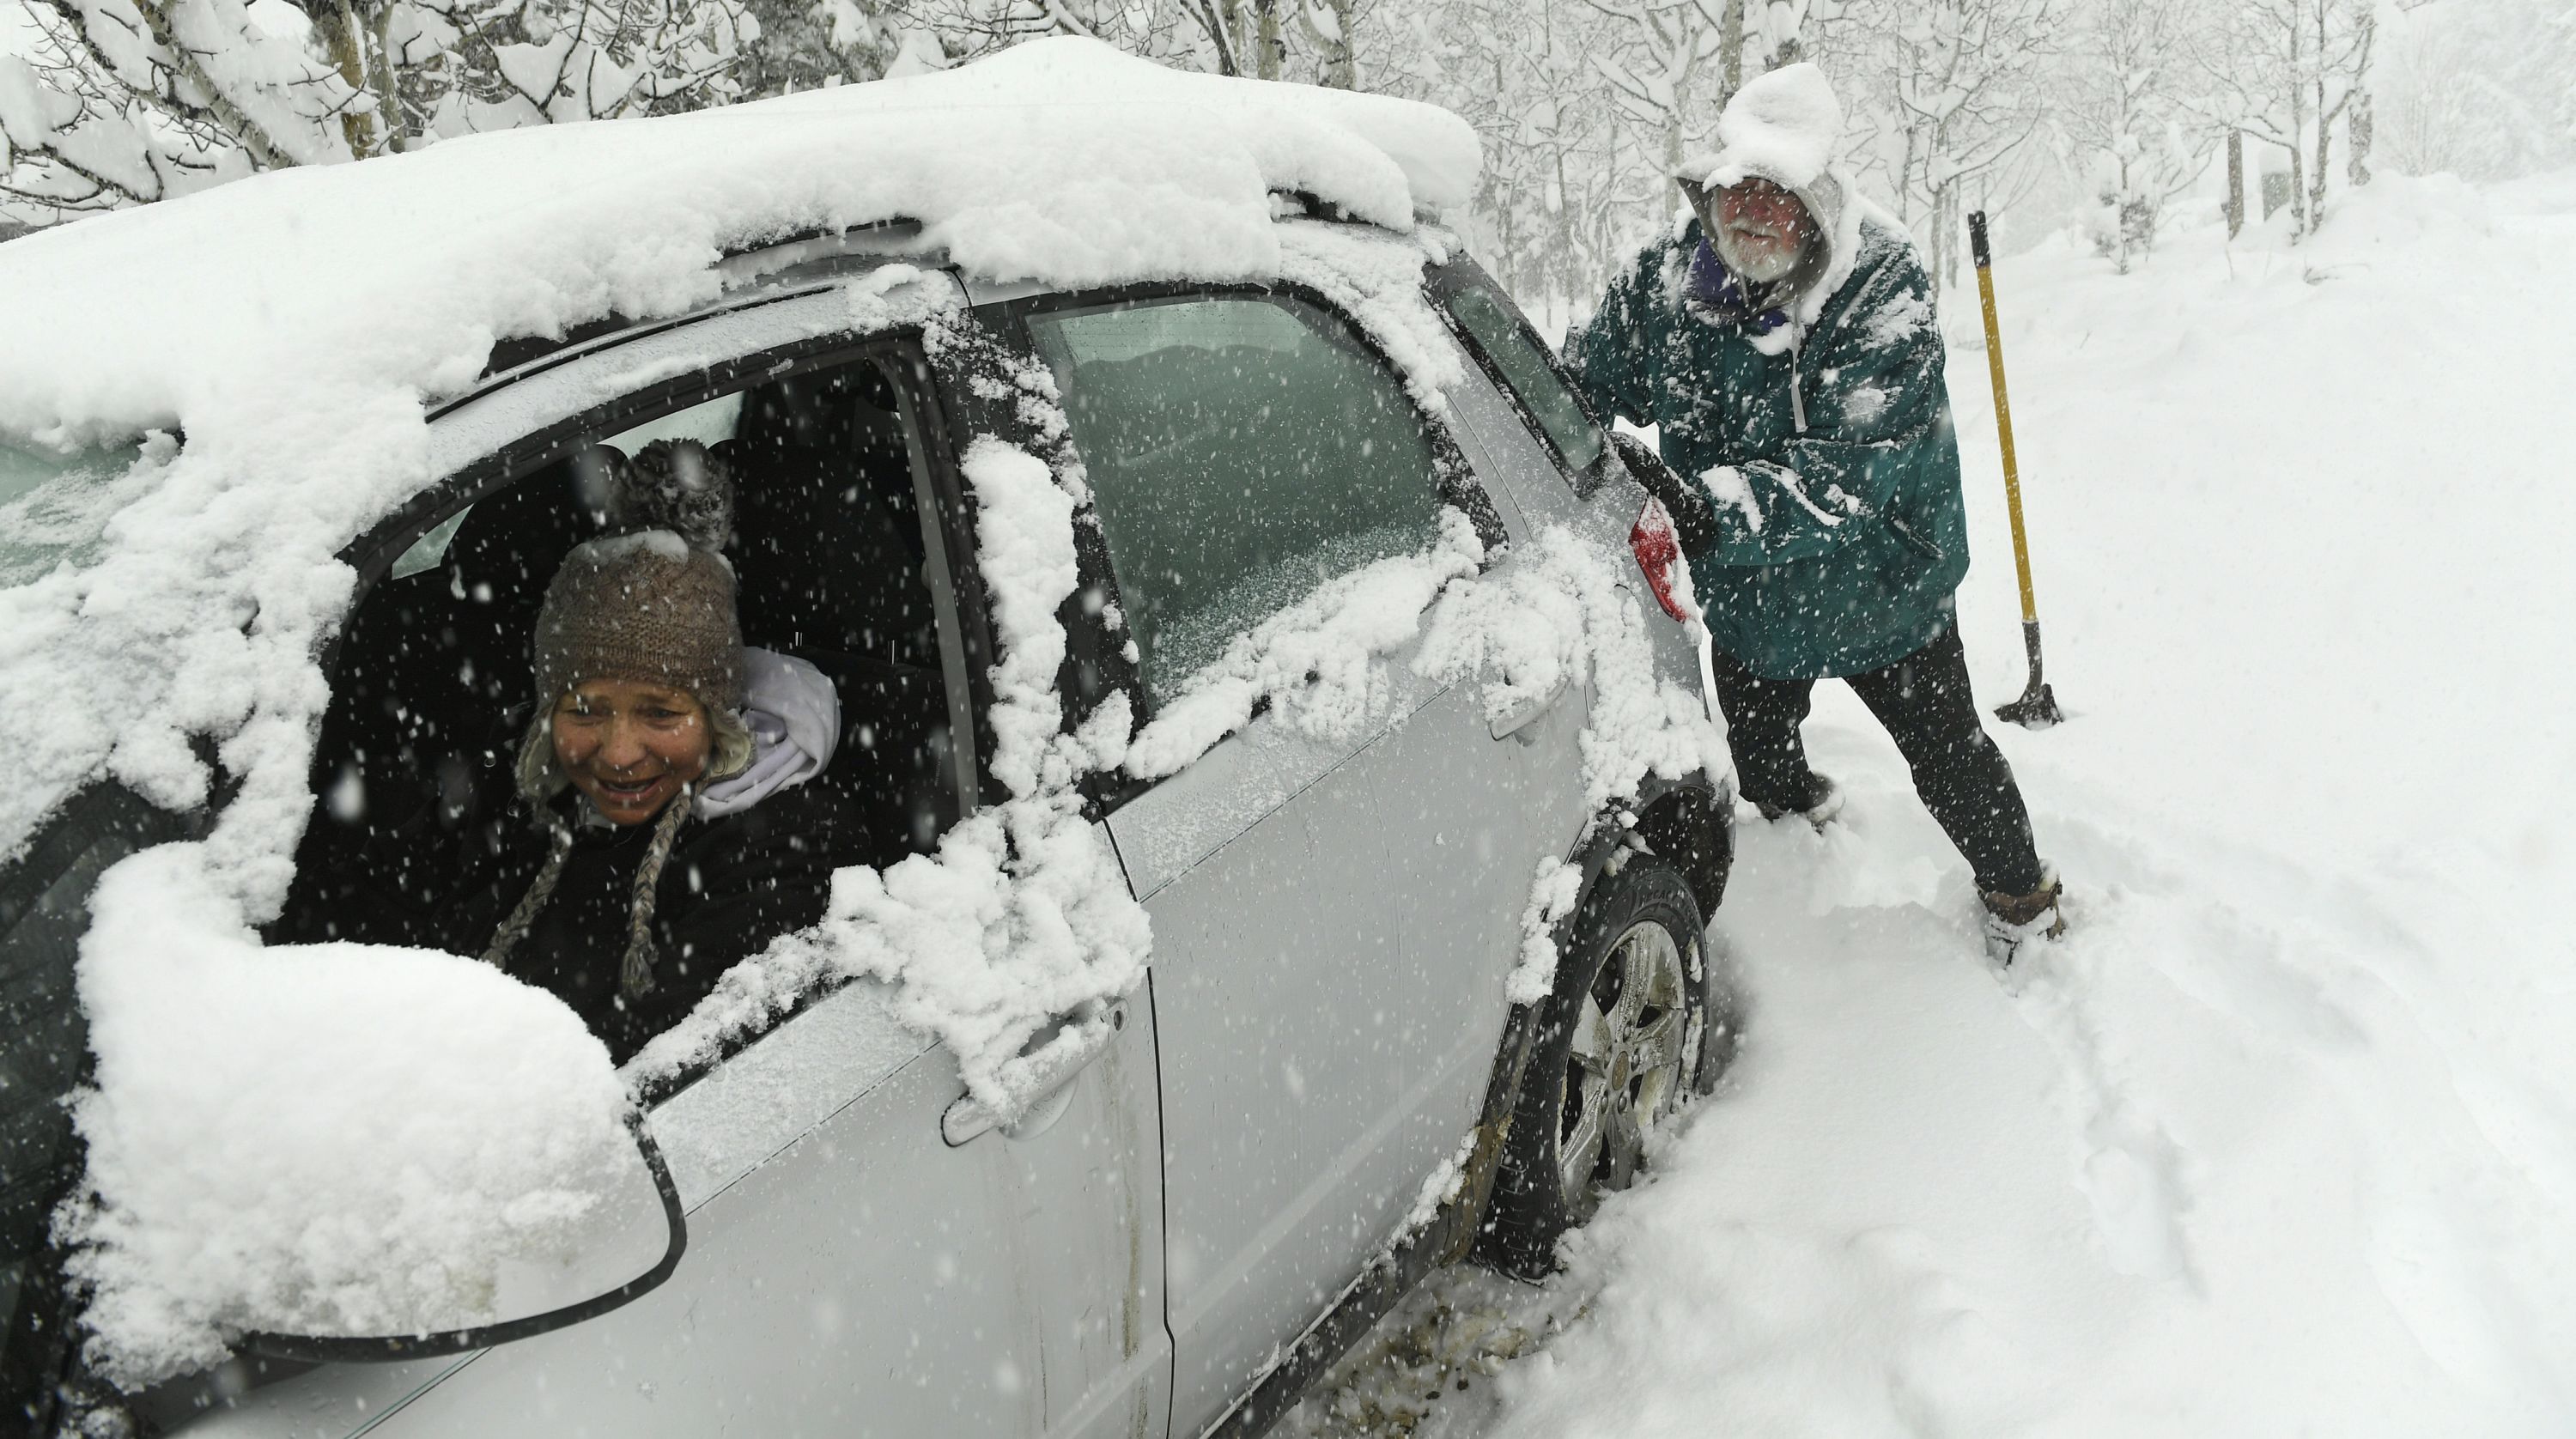 Linda Hurth, in the driver's seat, tells her husband, Ed McCaffrey, when to push as they try to get her car unstuck from the snow on Wednesday, March 13, in Nederland, Colorado. Blizzard  warnings were issued across the state.